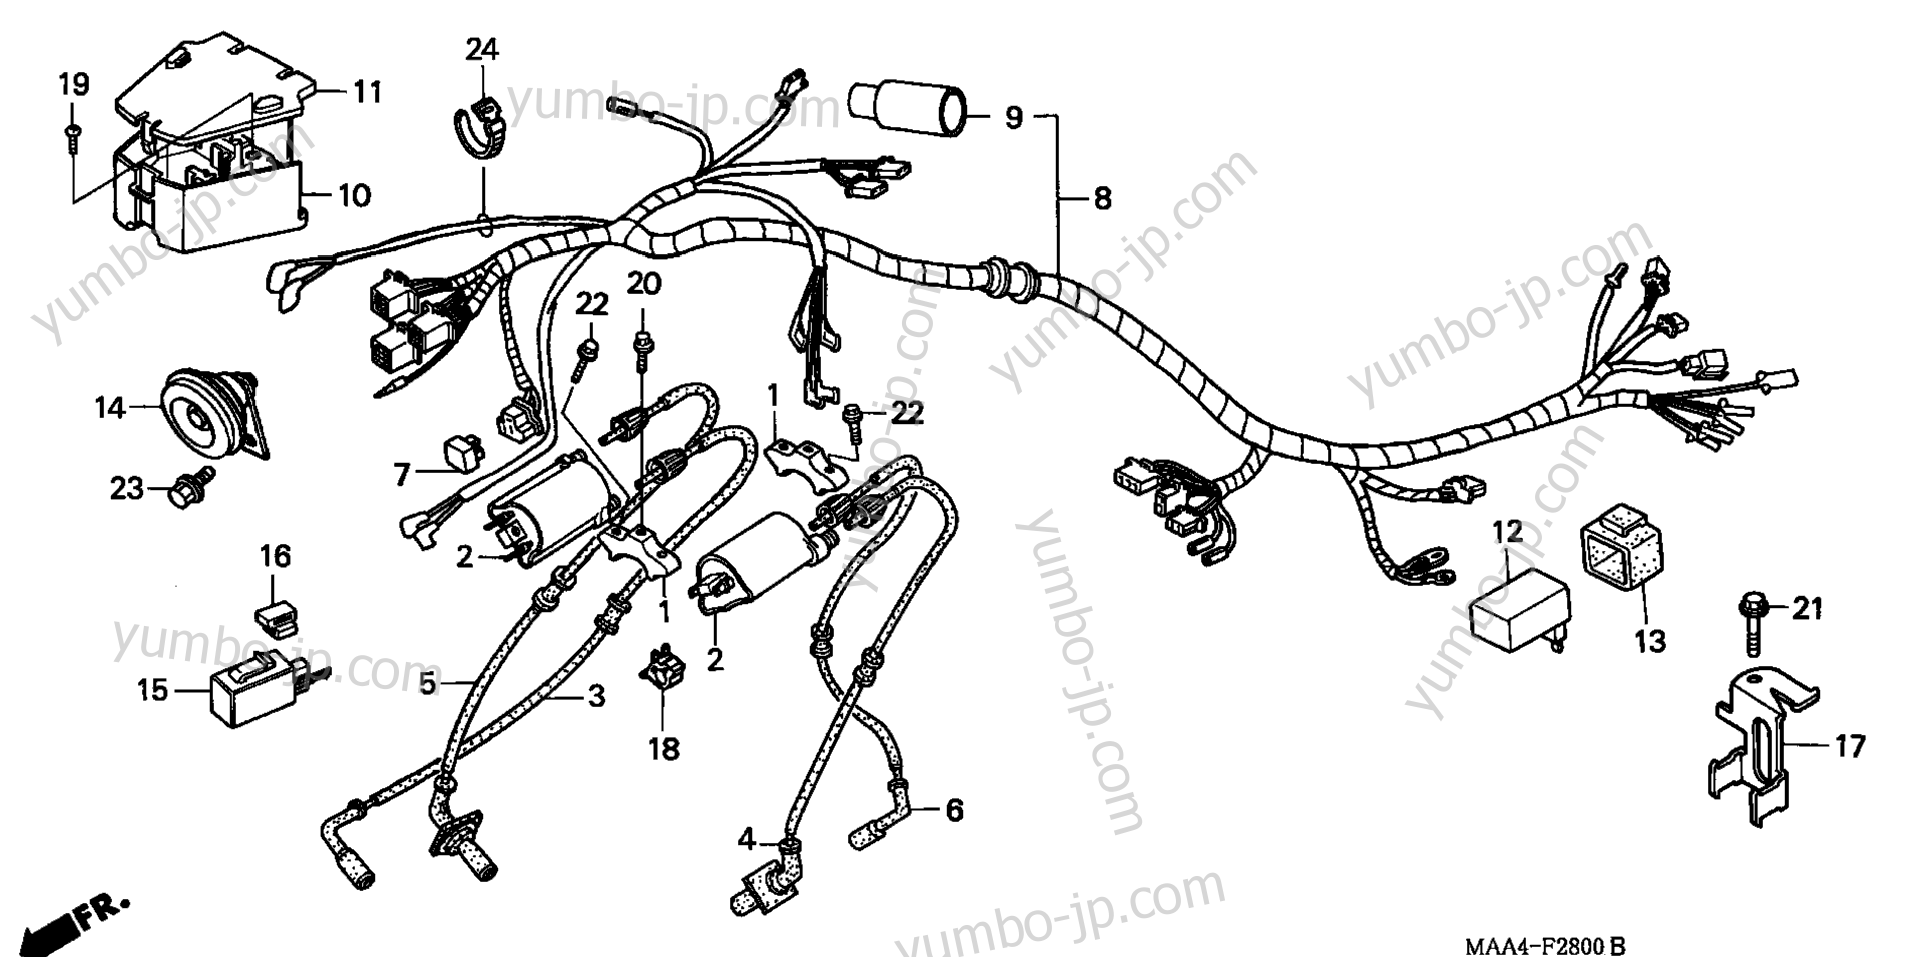 WIRE HARNESS (1) for motorcycles HONDA VT1100C A 1999 year